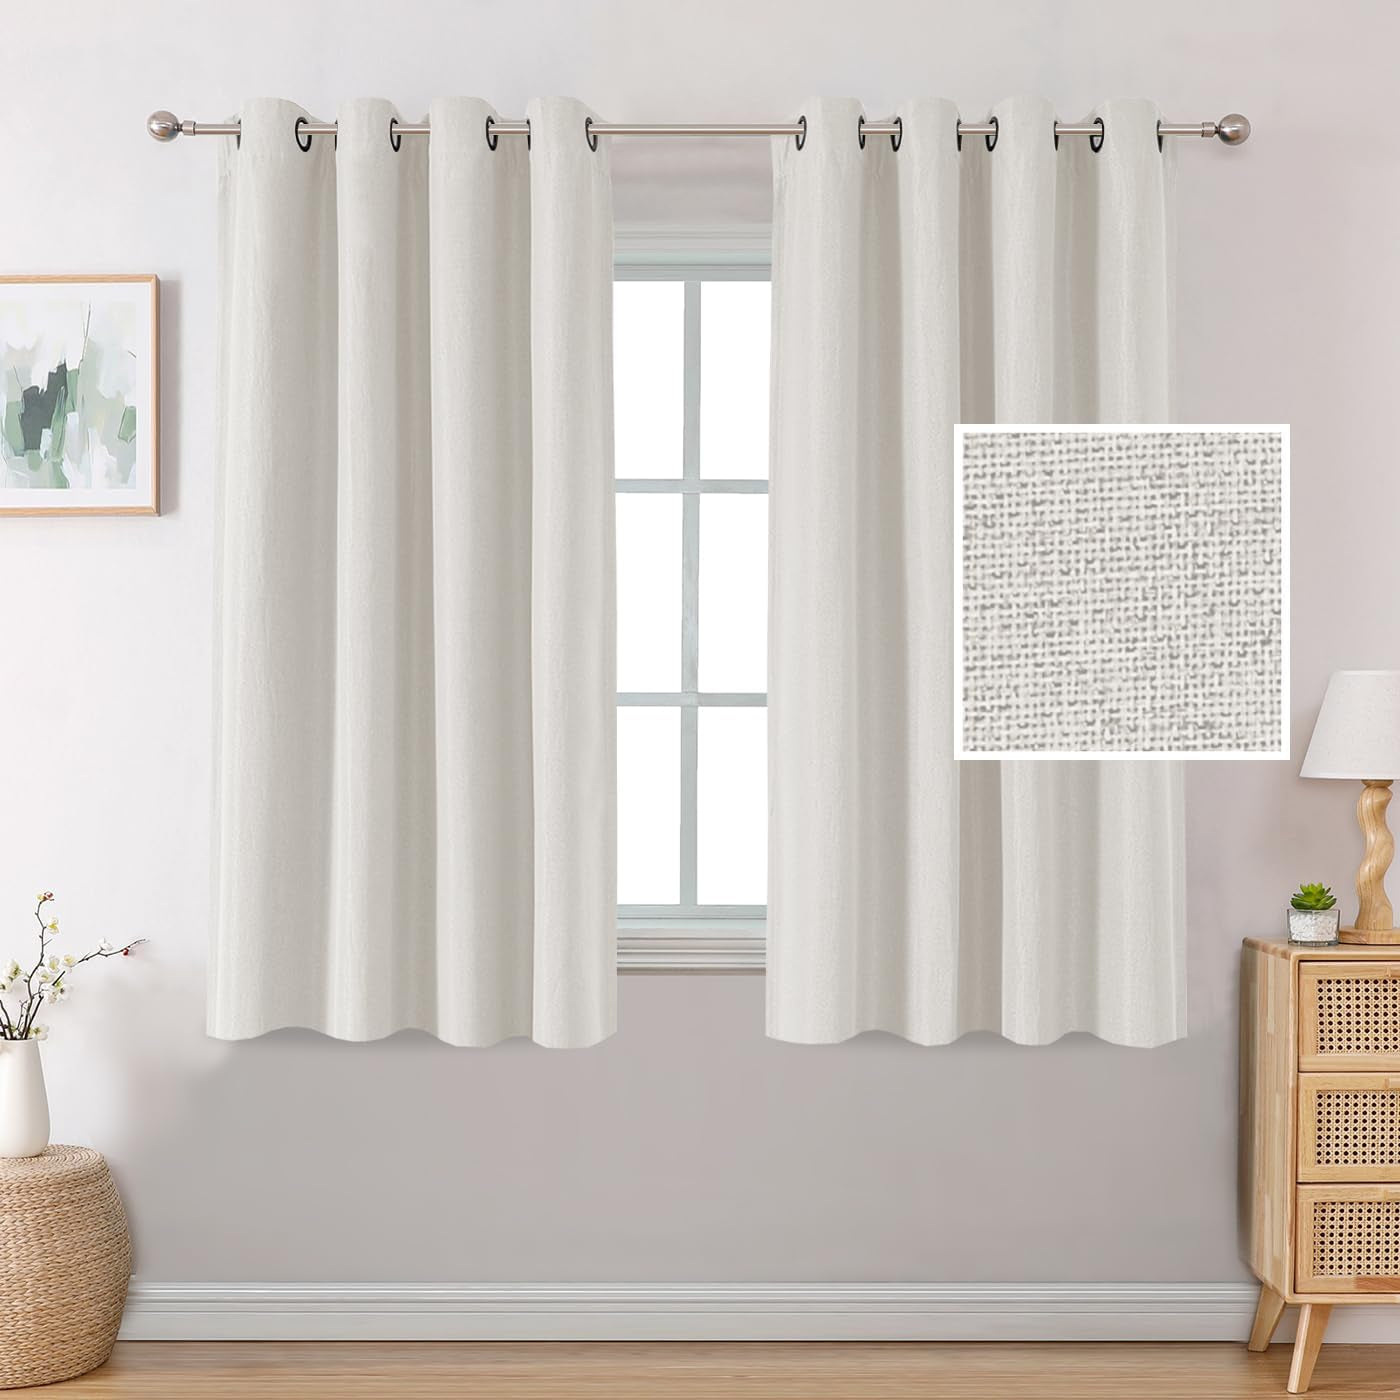 H.VERSAILTEX Linen Blackout Curtains 84 Inches Long Thermal Insulated Room Darkening Linen Curtains for Bedroom Textured Burlap Grommet Window Curtains for Living Room, Bluestone and Taupe, 2 Panels  H.VERSAILTEX Natural 52"W X 45"L 